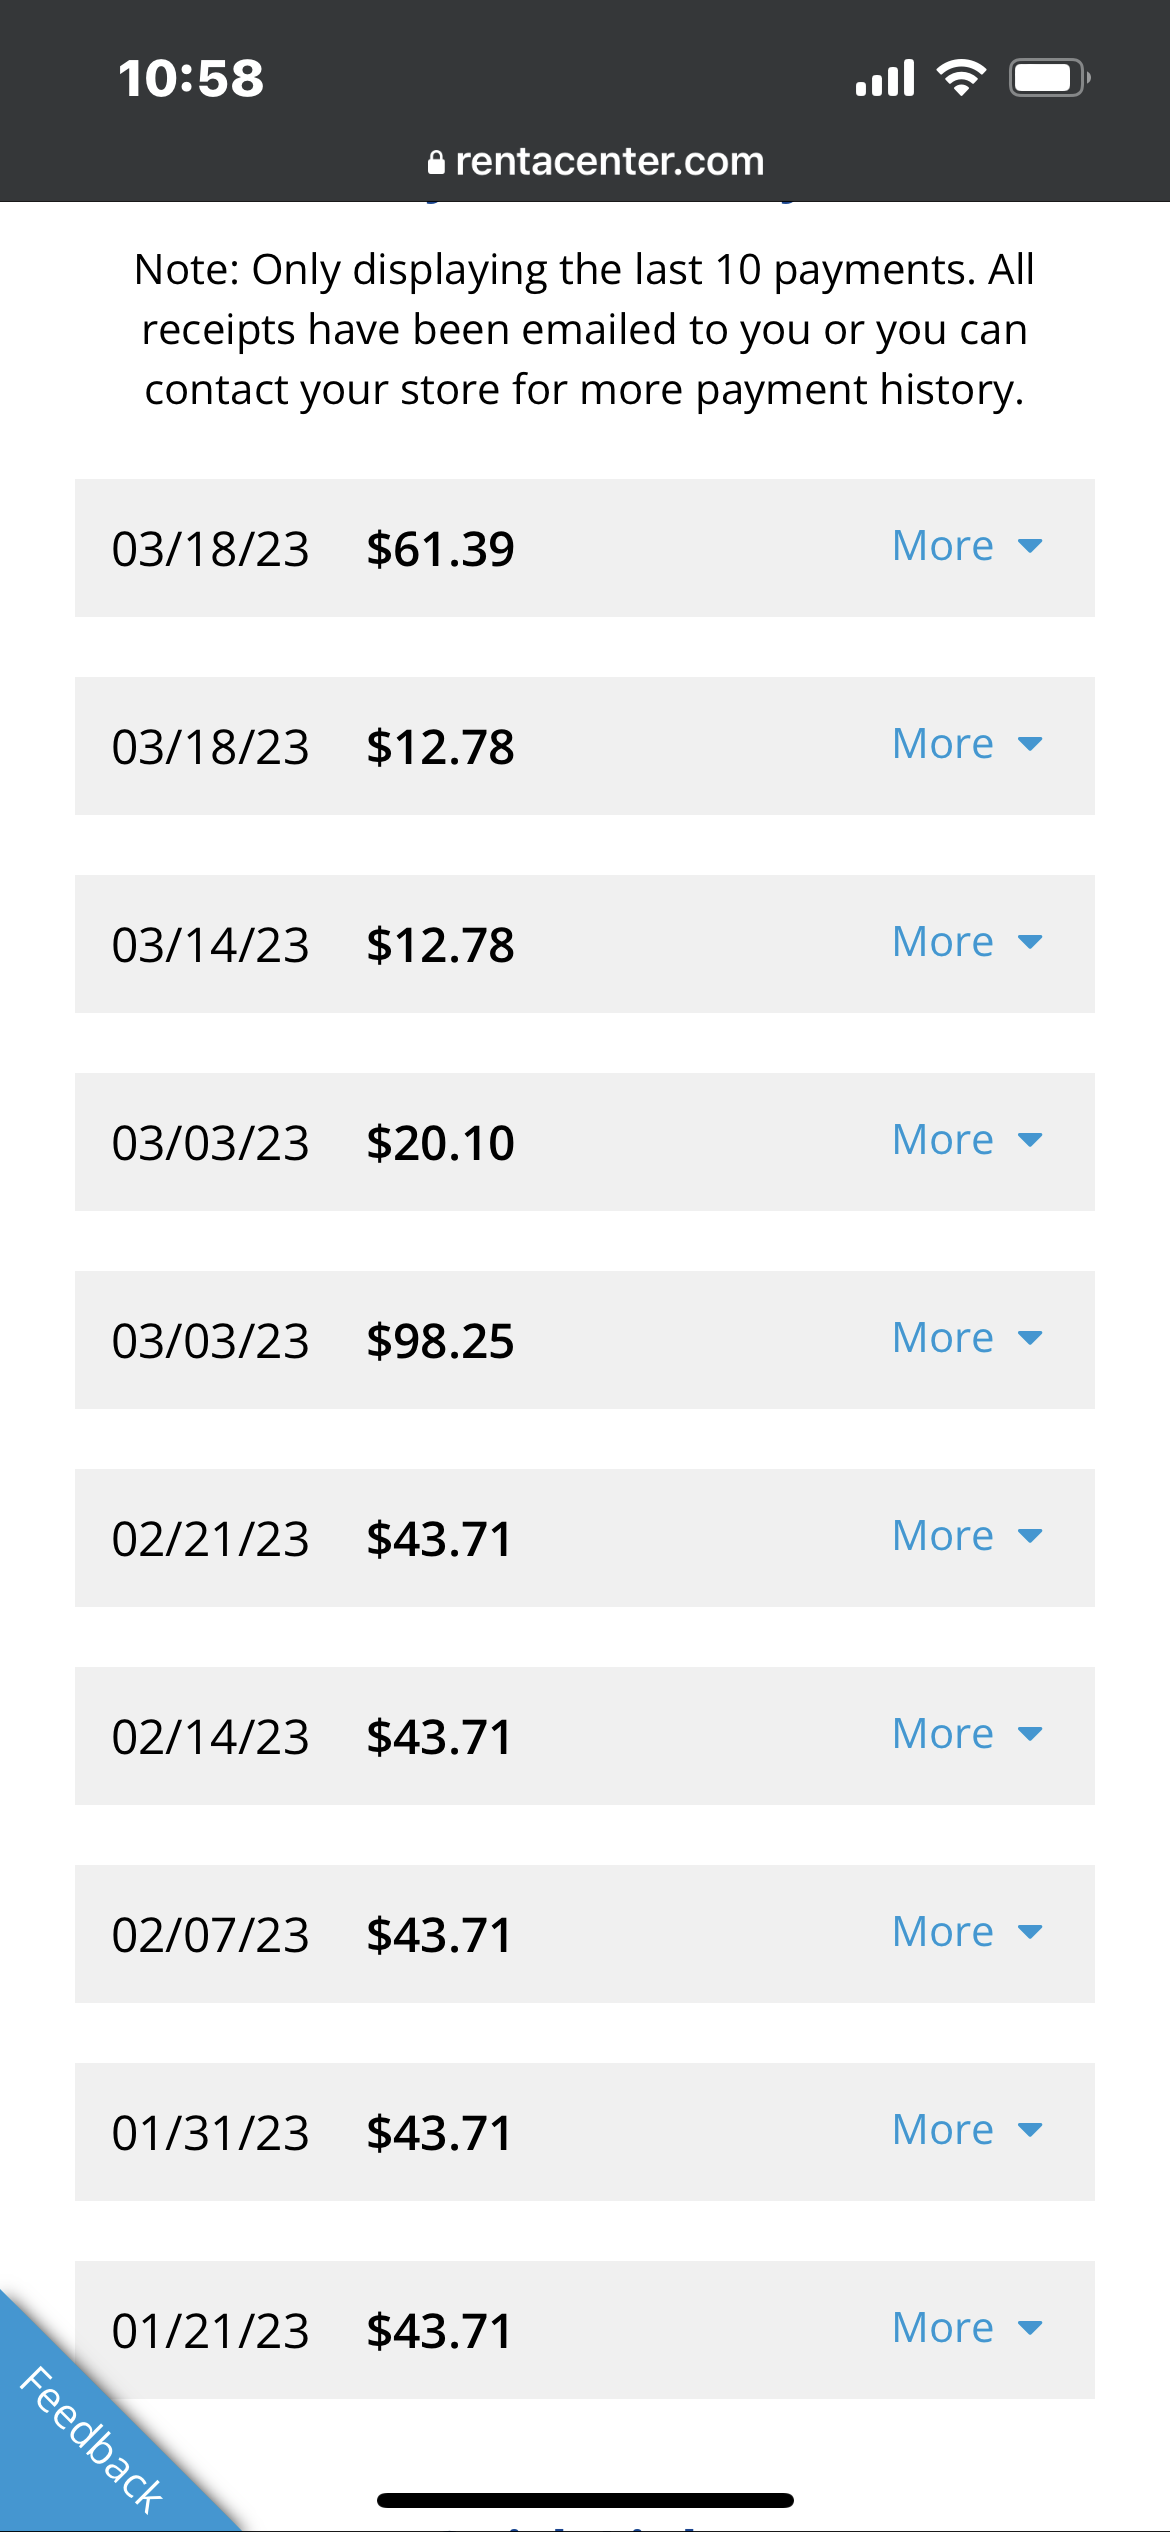 Payments they said I never made. 